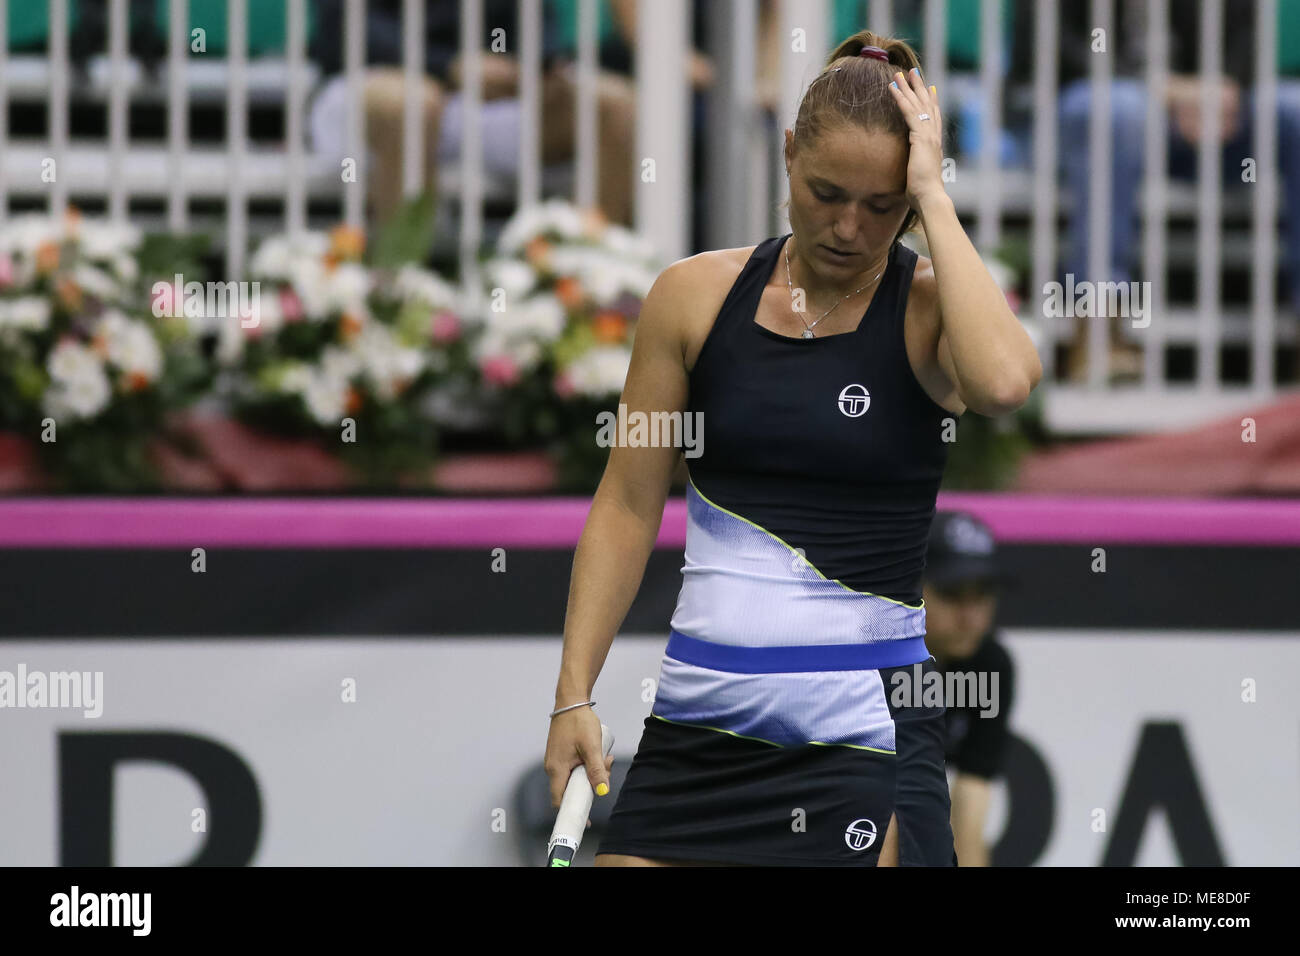 Montreal, Canada, 21 April 2018. Kateryna Bondarenko of the Ukraine reacts after missing a point against against Eugenie Bouchard of Canada during their Fed Cup World Group II play-off tennis match in Montreal, Quebec, Canada on Saturday, April 21, 2018. Credit: Dario Ayala/Alamy Live News Stock Photo